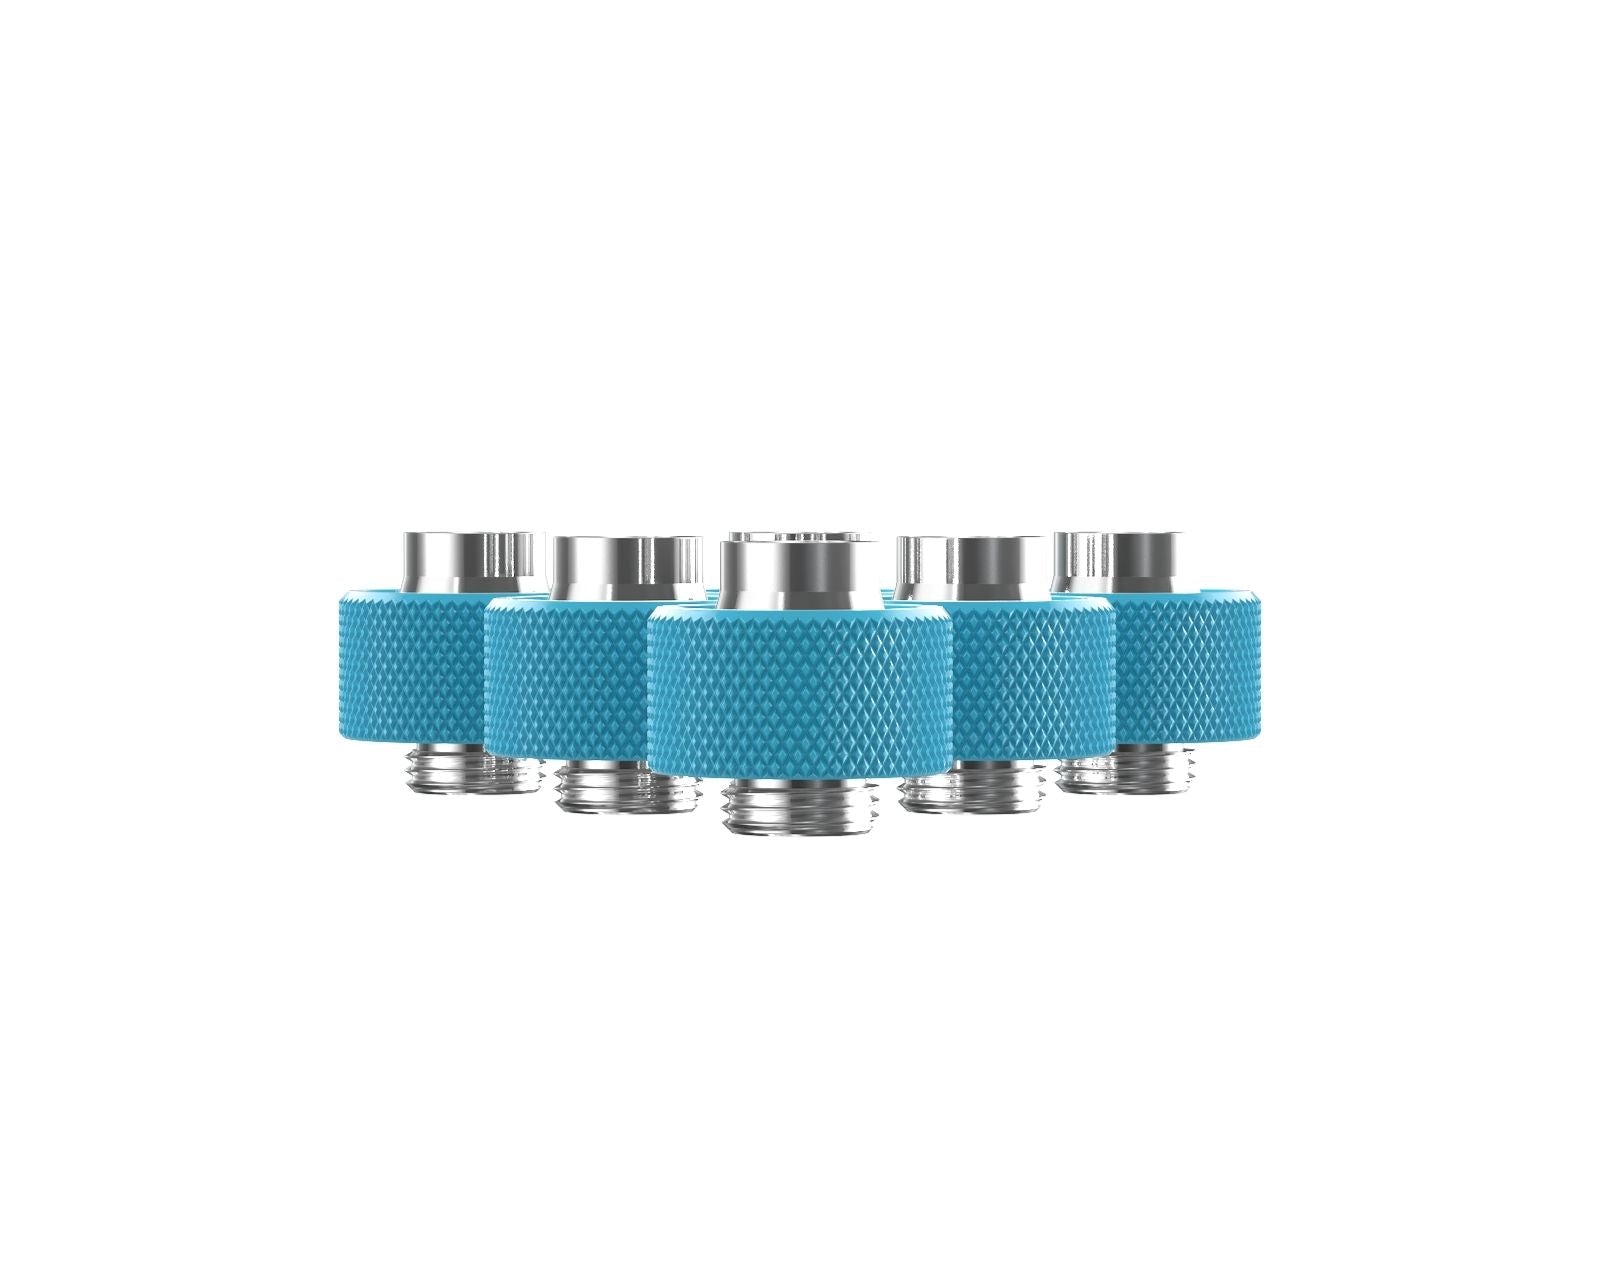 PrimoChill SecureFit SX - Premium Compression Fittings 6 Pack - For 1/2in ID x 3/4in OD Flexible Tubing (F-SFSX34-6) - Available in 20+ Colors, Custom Watercooling Loop Ready - Sky Blue